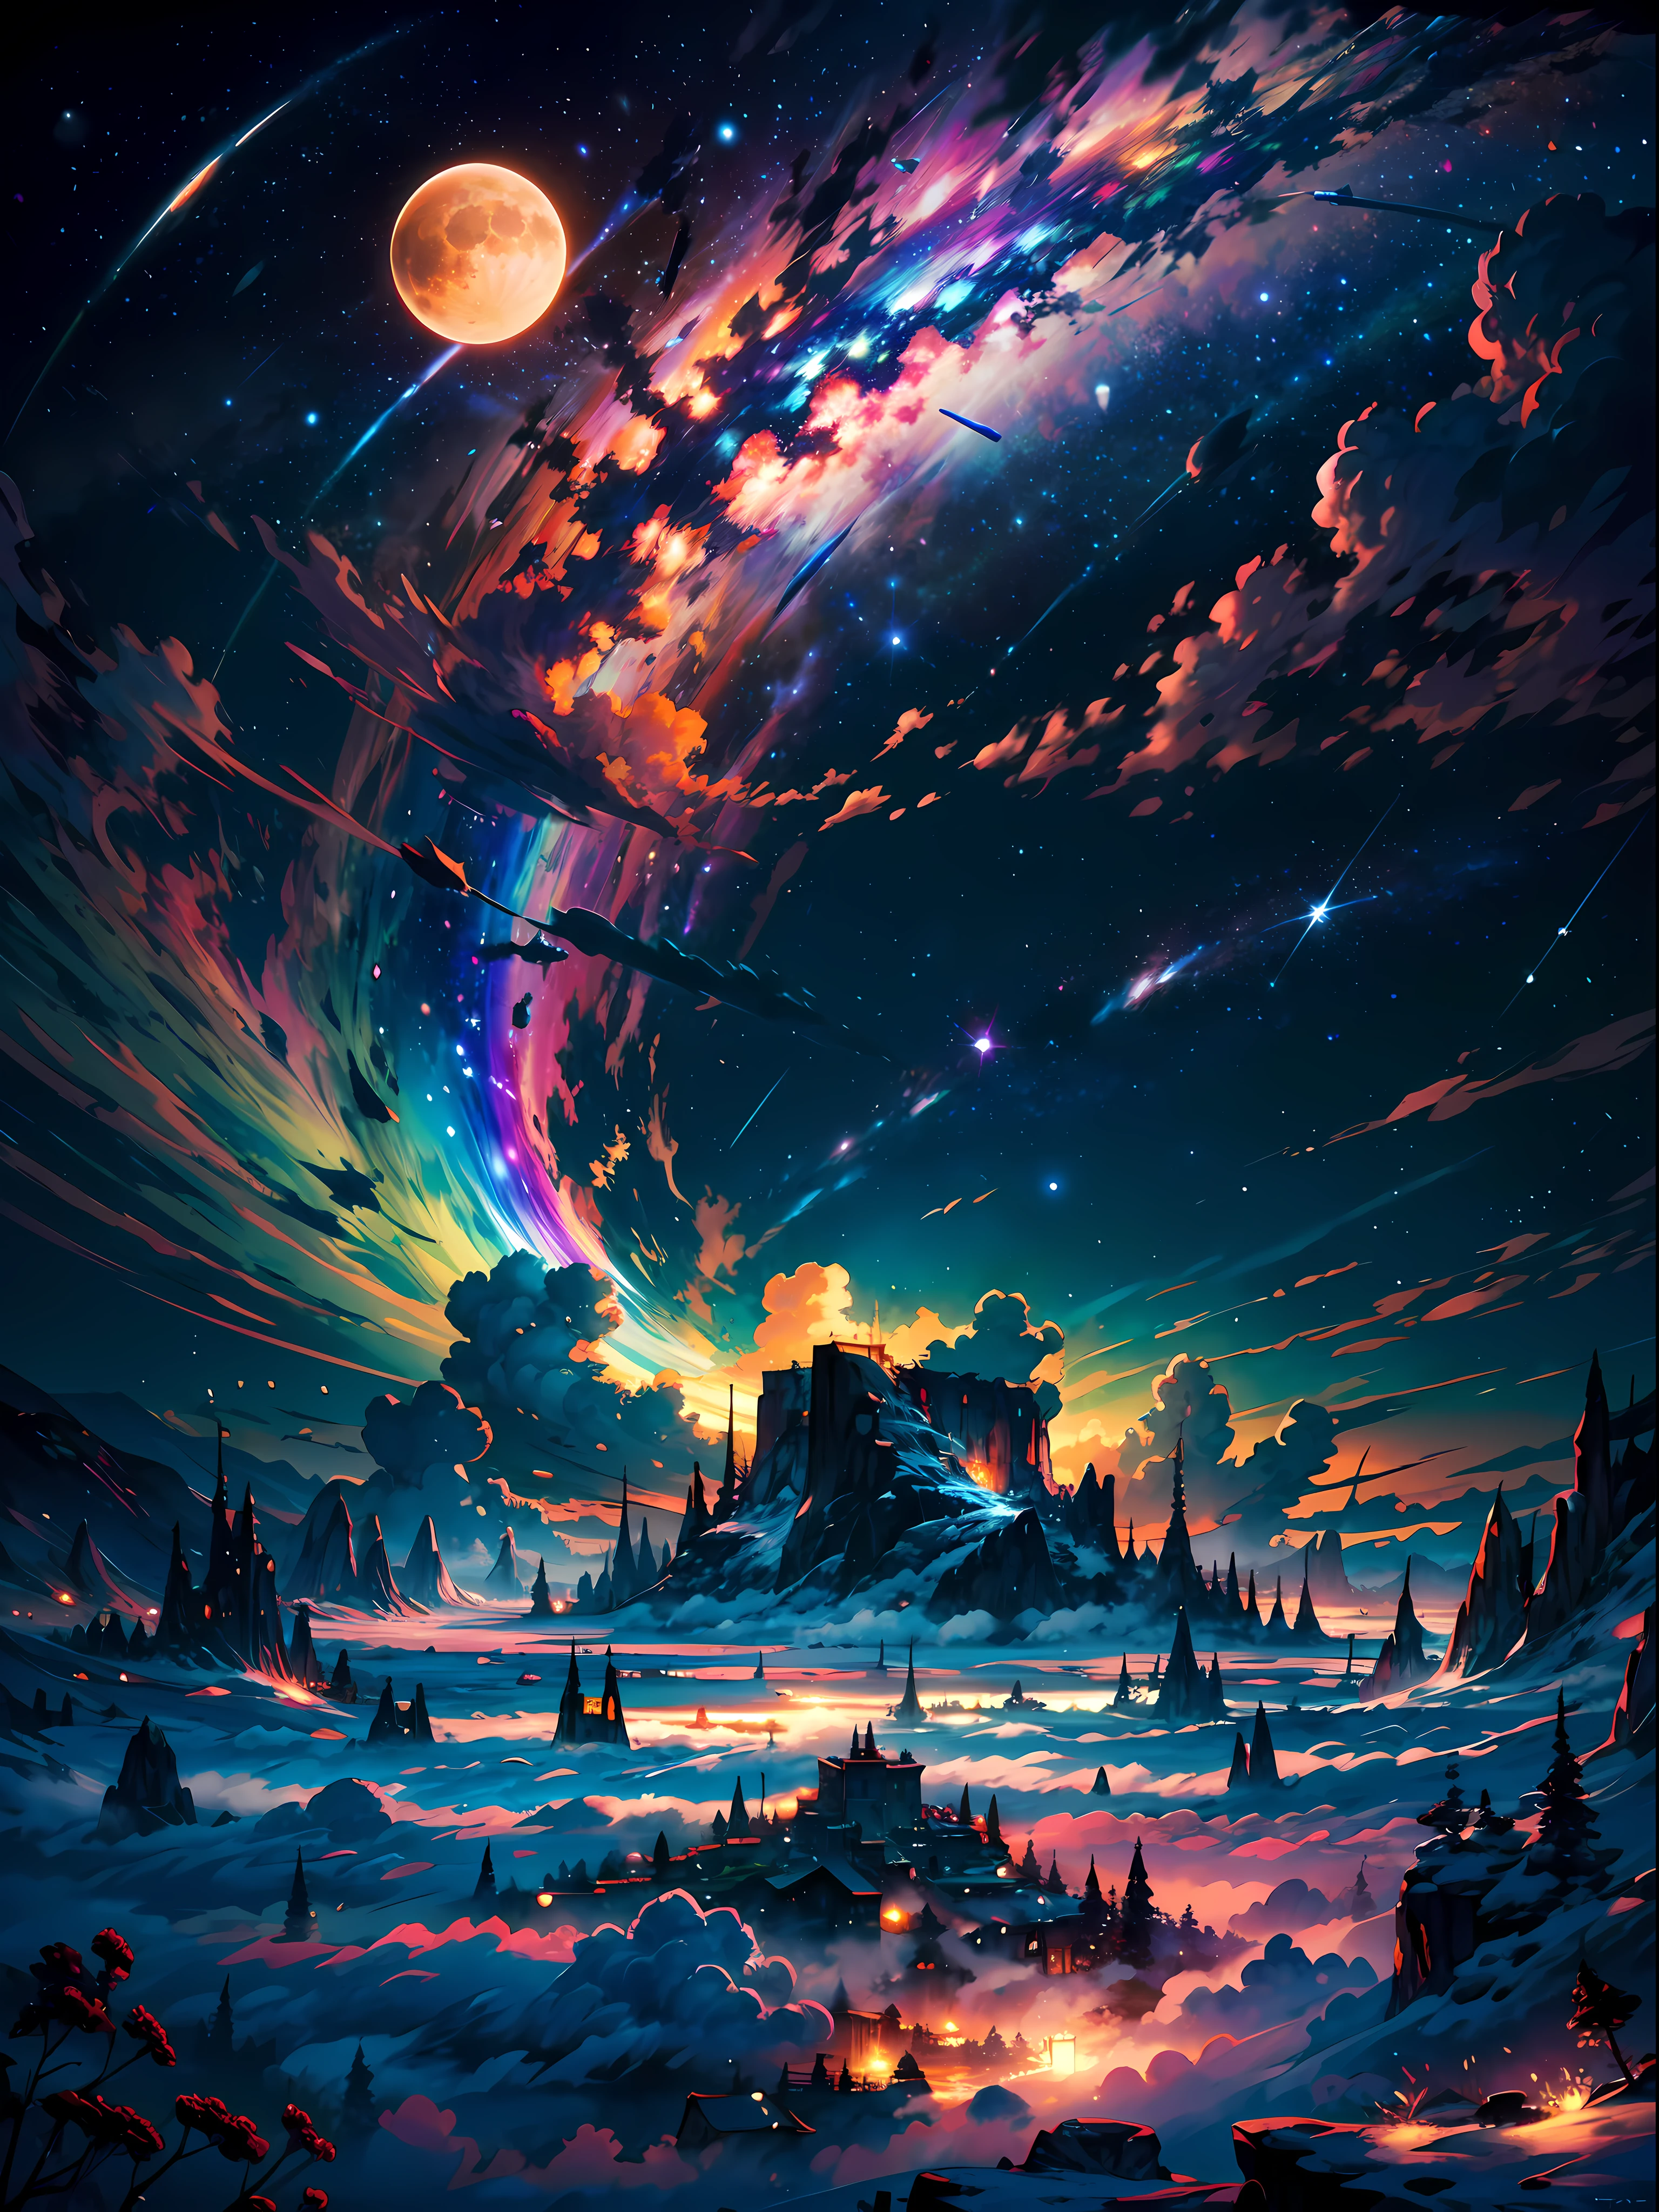 The image depicts a breathtaking otherworldly scenery that is nothing short of magical. It appears to be taken from high above the clouds, as the viewer is presented with a stunning panoramic view of the vast expanse of the sky. The stars twinkle and glimmer, creating a mesmerizing spectacle that is truly awe-inspiring. A colorful rainbow is also visible in the distance, adding a pop of vibrant hues to the otherwise serene and tranquil atmosphere. The sun shines brightly, casting a warm and welcoming glow over the entire scene. Overall, this image is a symphony of colors, light, and beauty that transports the viewer to another world entirely.